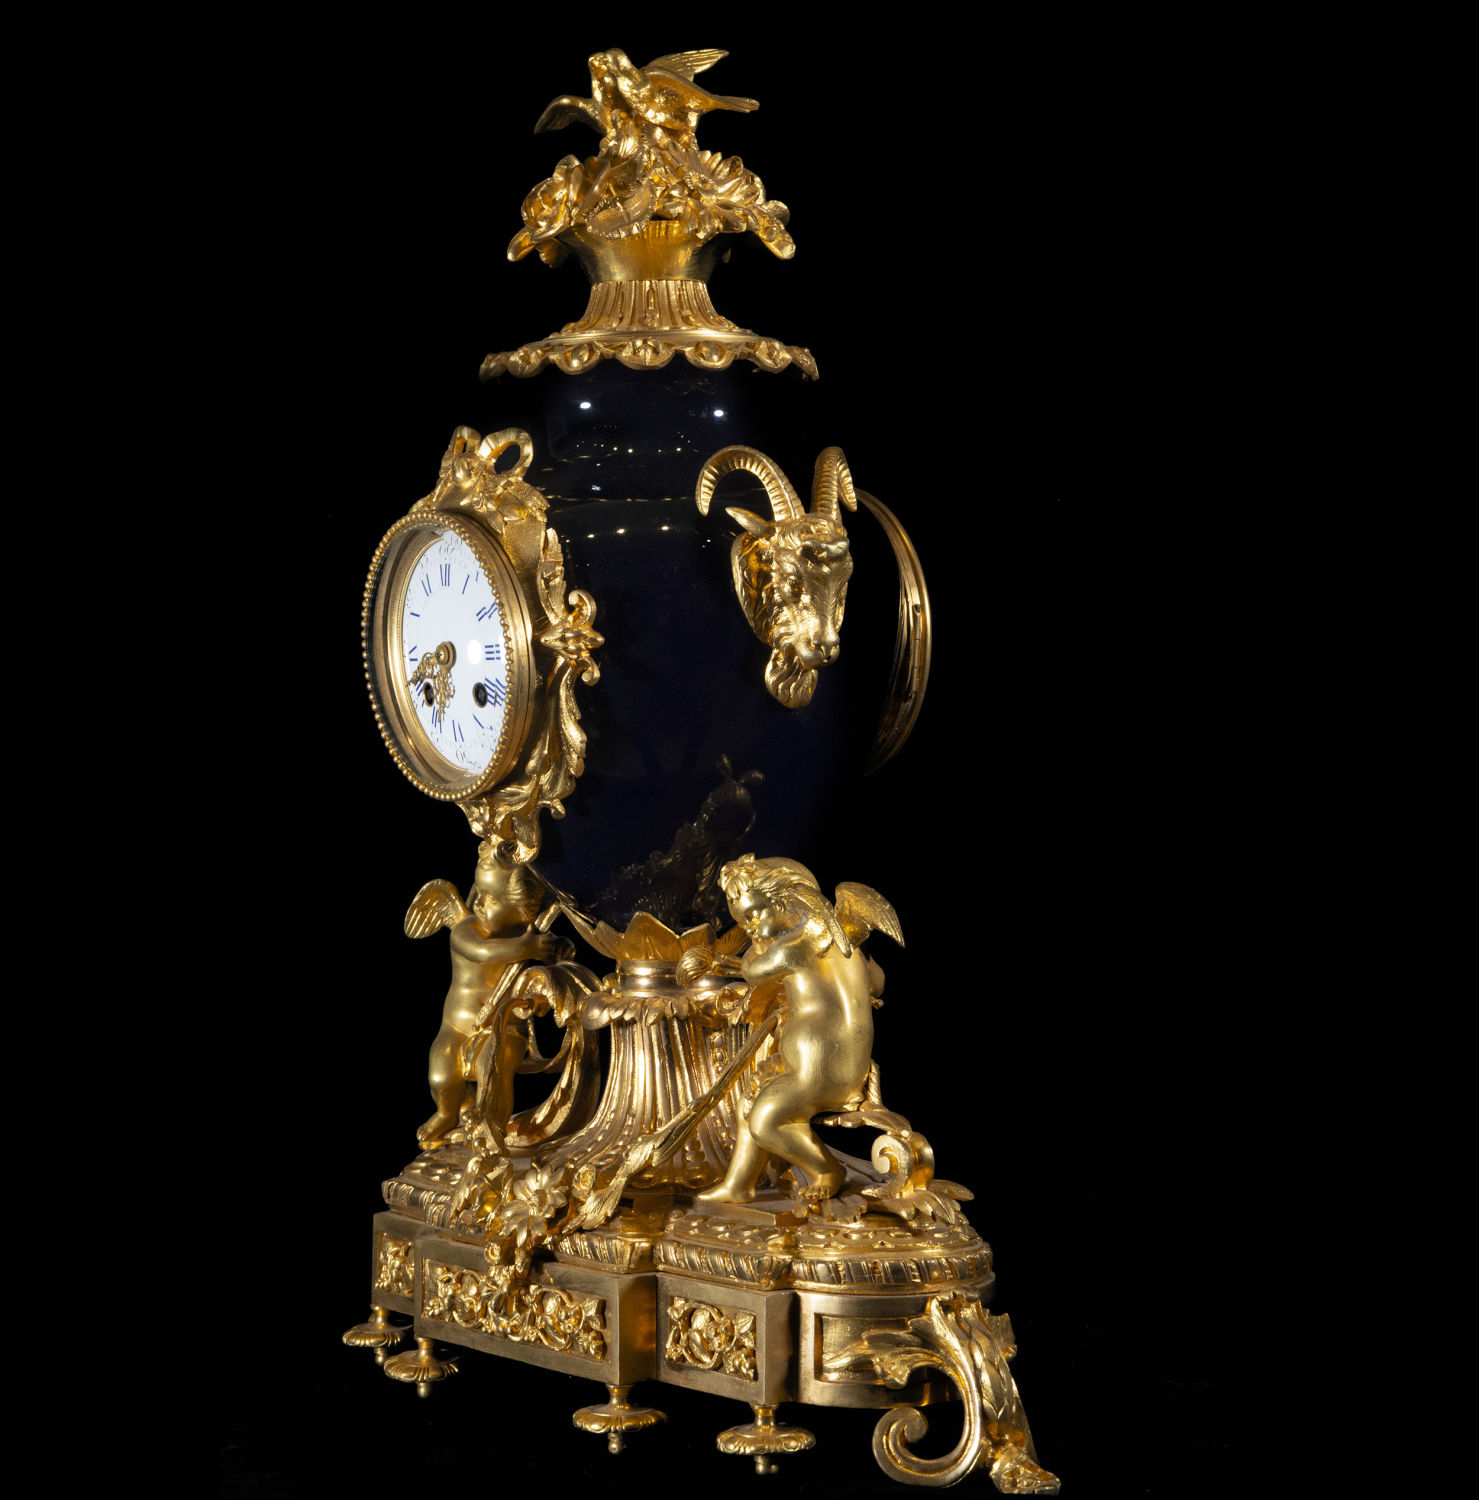 Elegant and Large Table Clock with French Sèvres Porcelain Garnish "Bleu Royale" Napoleon III of the - Image 5 of 12